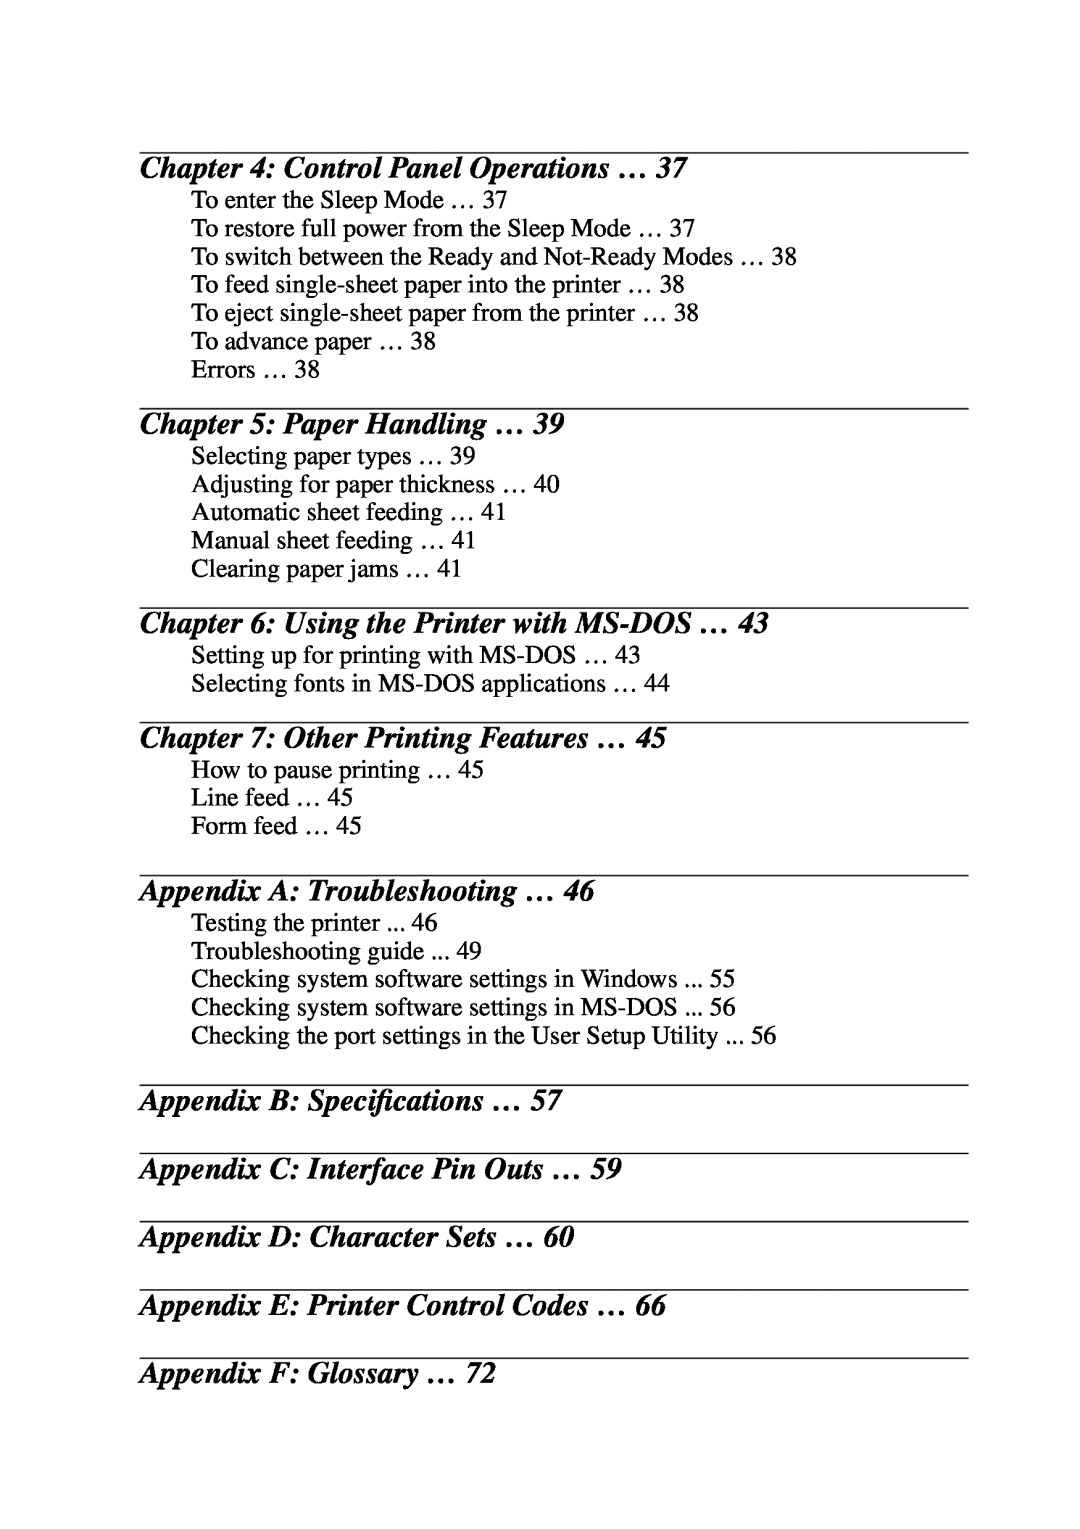 Star Micronics NX-2460C user manual Control Panel Operations …, Paper Handling …, Using the Printer with MS-DOS … 